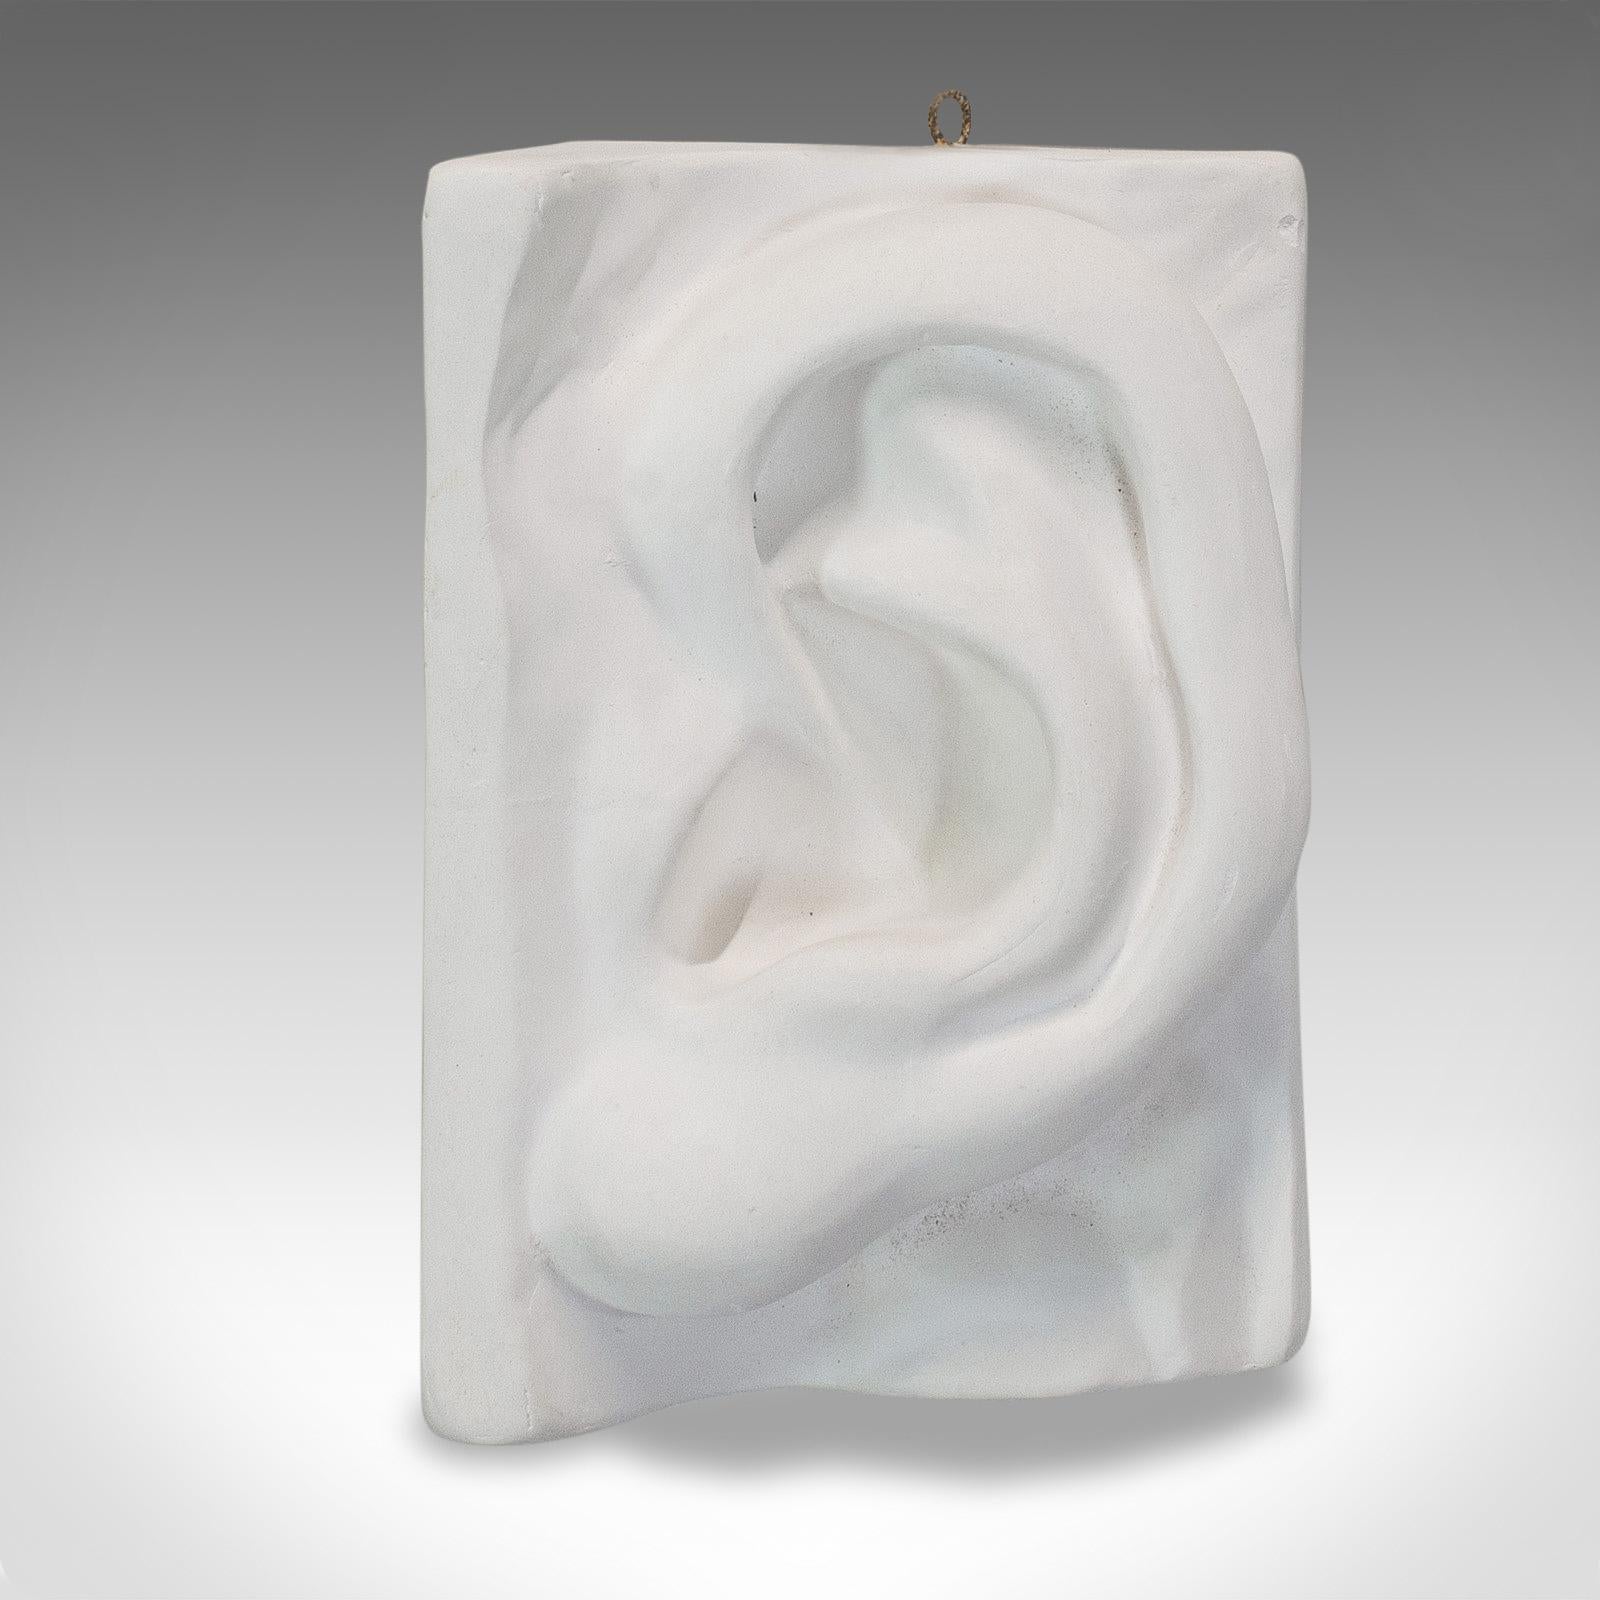 This is a vintage ear sculpture. An English, plaster cast haut relief anatomical portrait, dating to the late 20th century.

Unusual form and subject
Displays a desirable aged patina
Anatomical ear makes for a conversation piece
Replete with